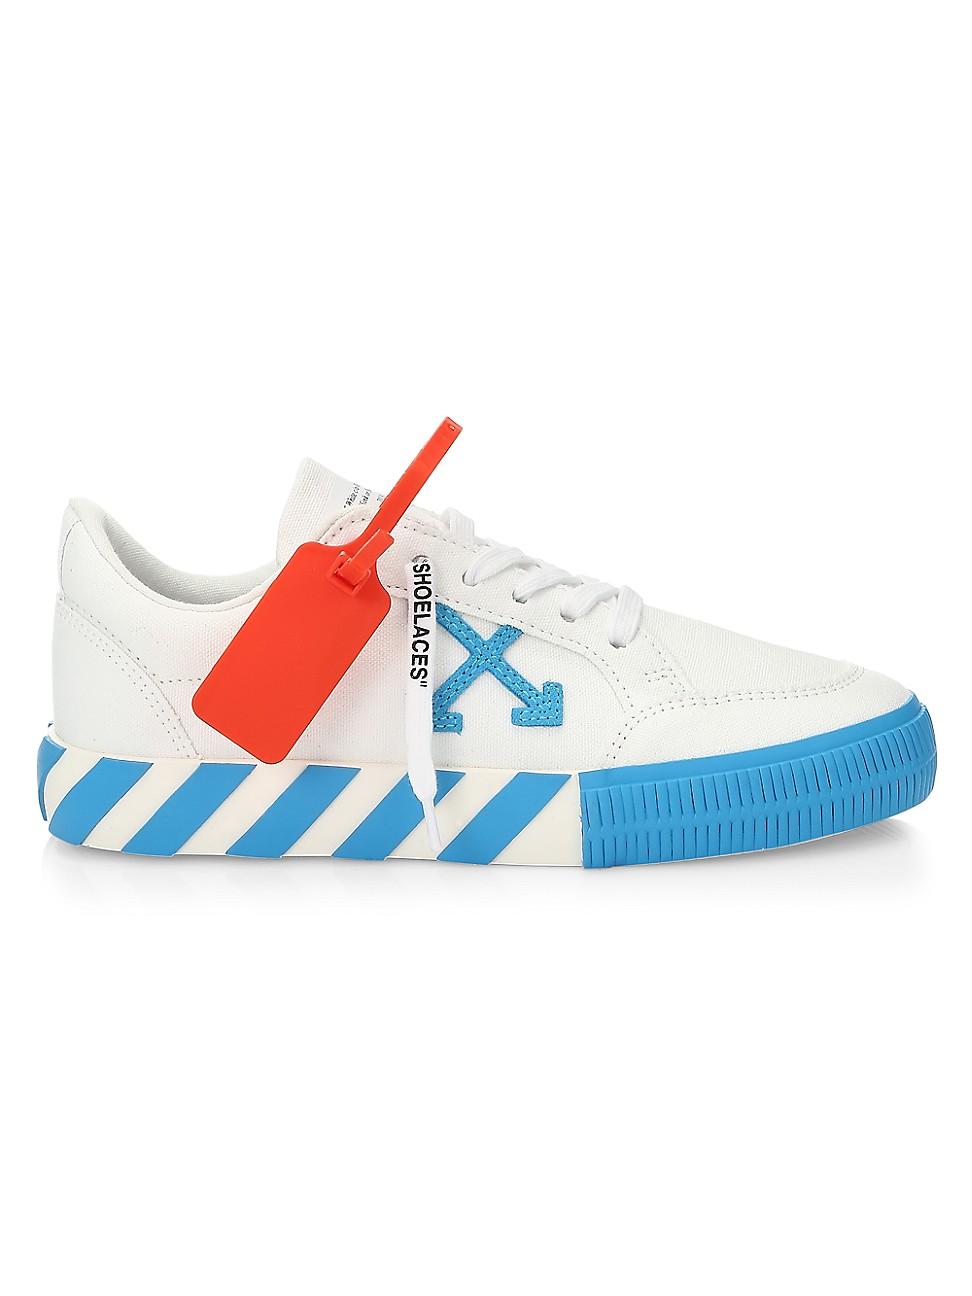 Off-White c/o Virgil Abloh Arrow Low-top Neon Canvas Sneakers in White Blue  (Blue) | Lyst